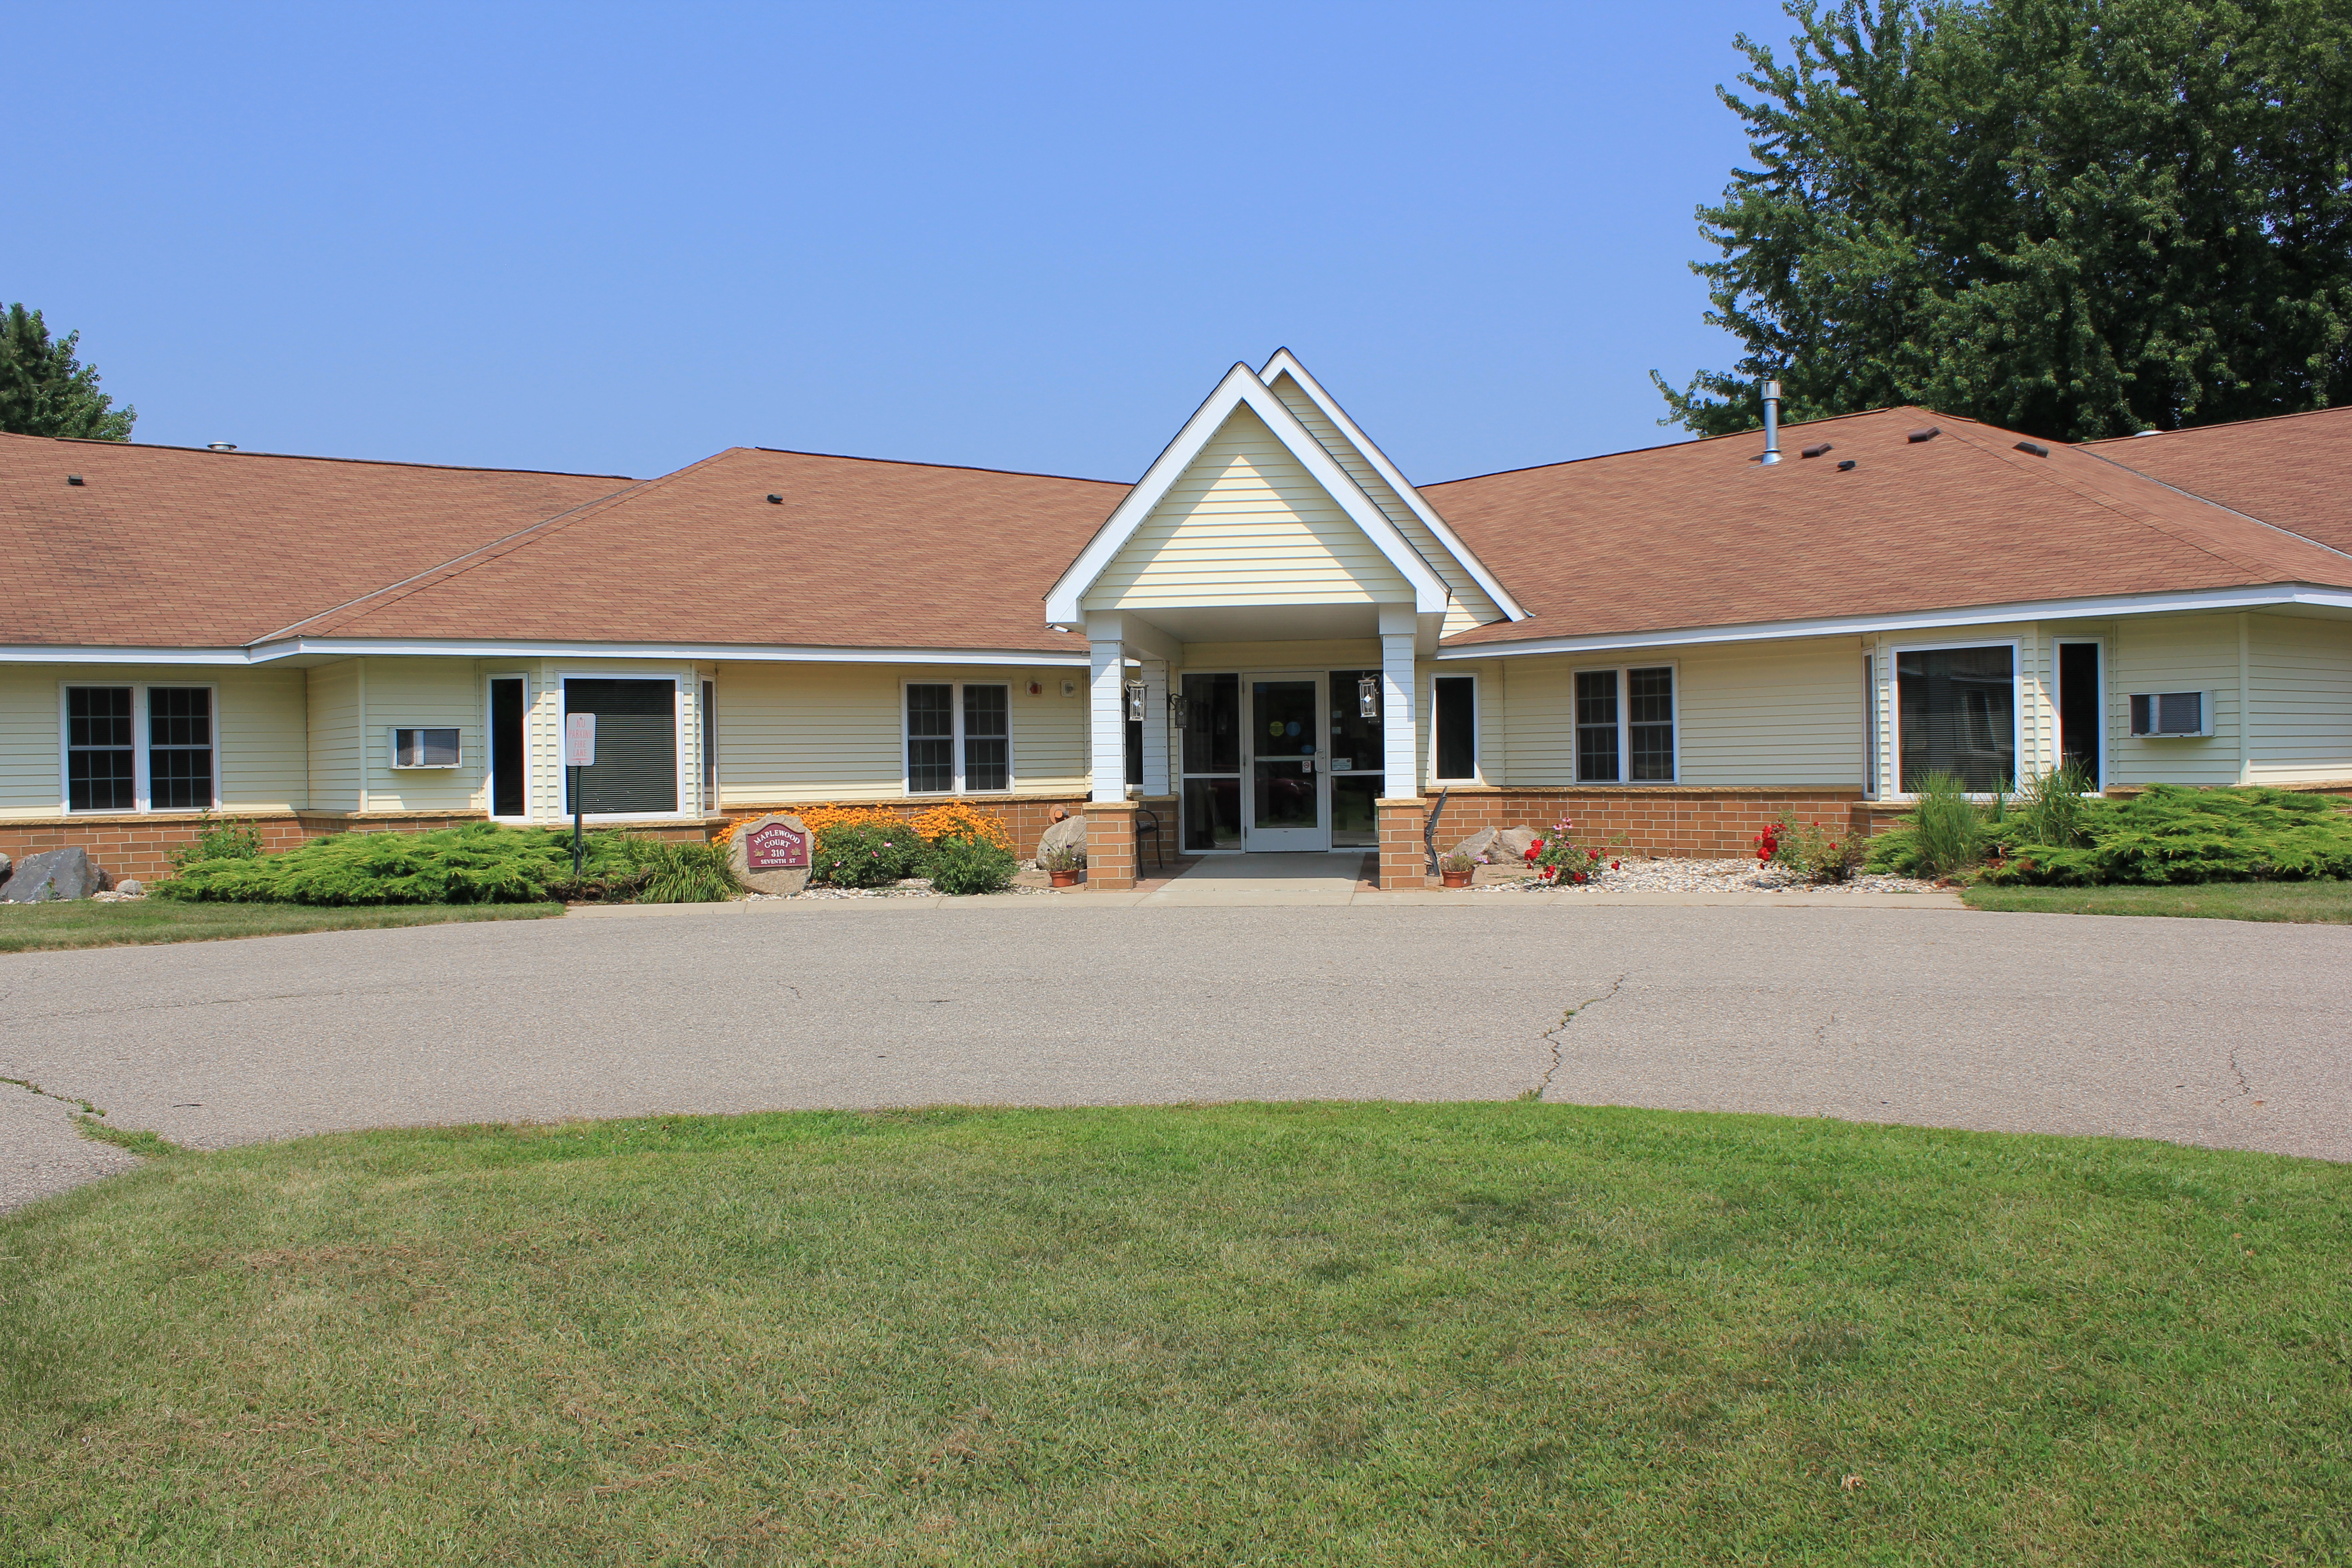 Maplewood Court Assisted Living | Assisted Living Facilities – Maple Lawn